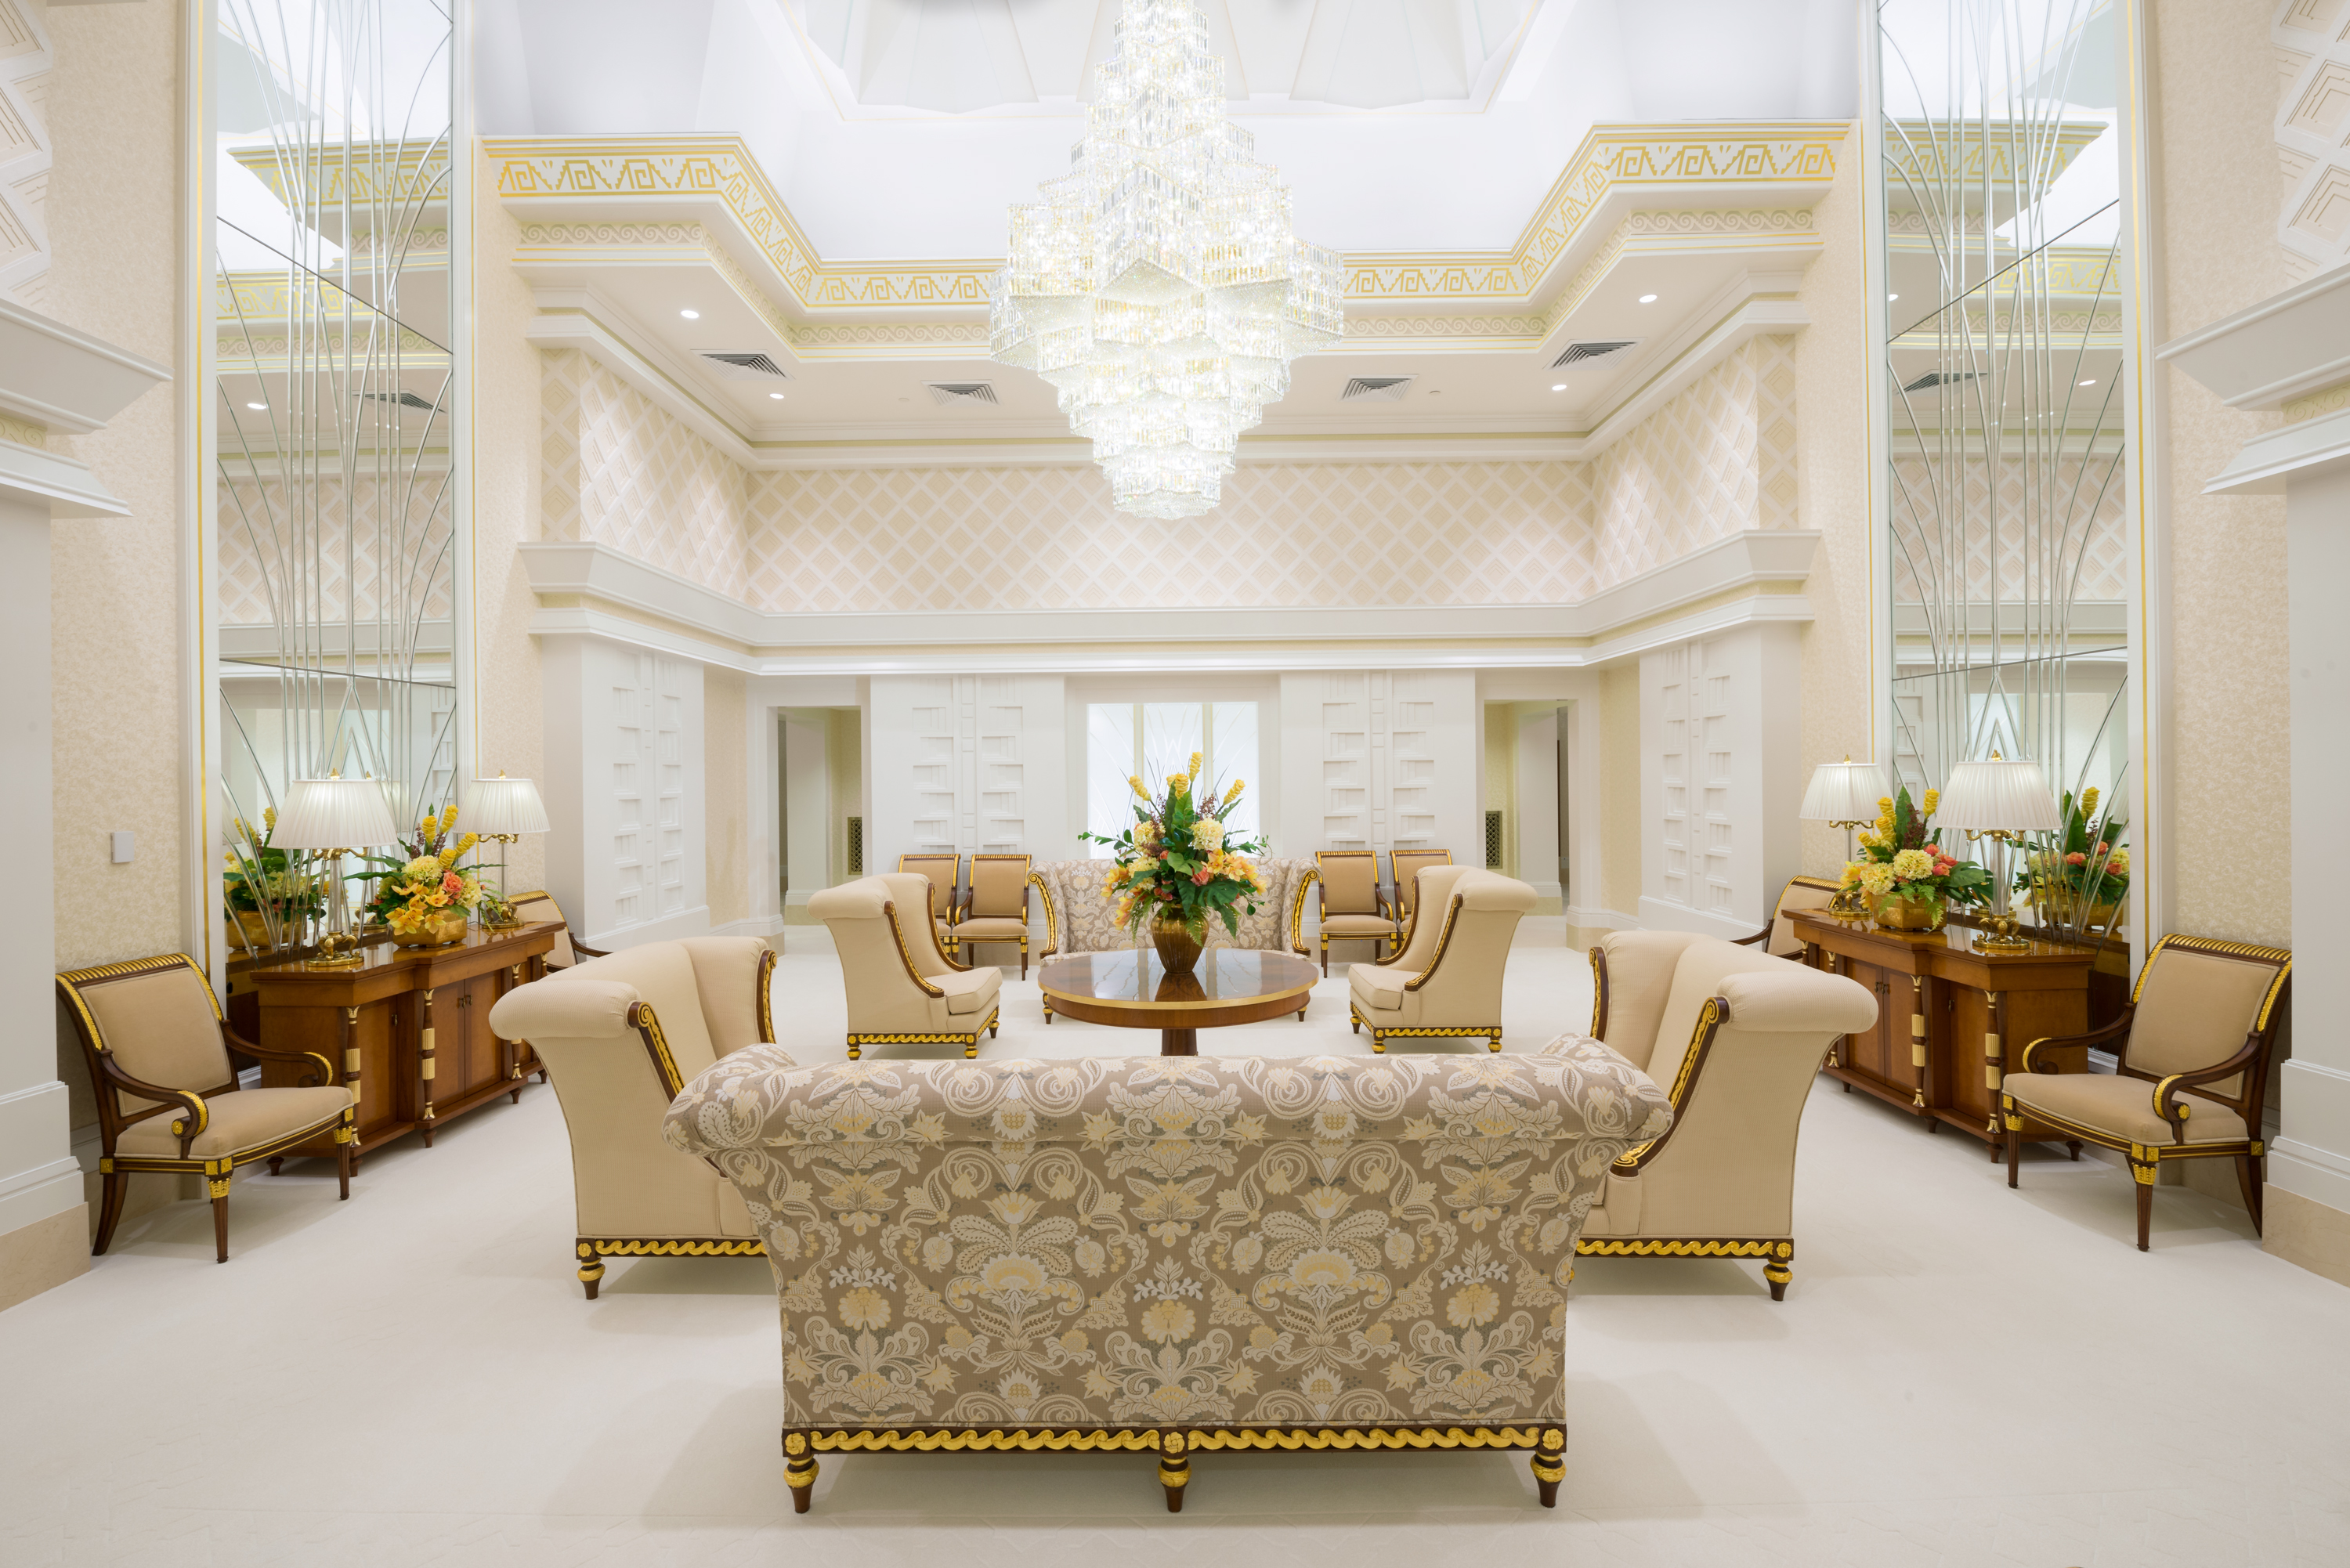 An open white room with armchairs, couches with flower designs, large mirrors and a large clear chandelier.